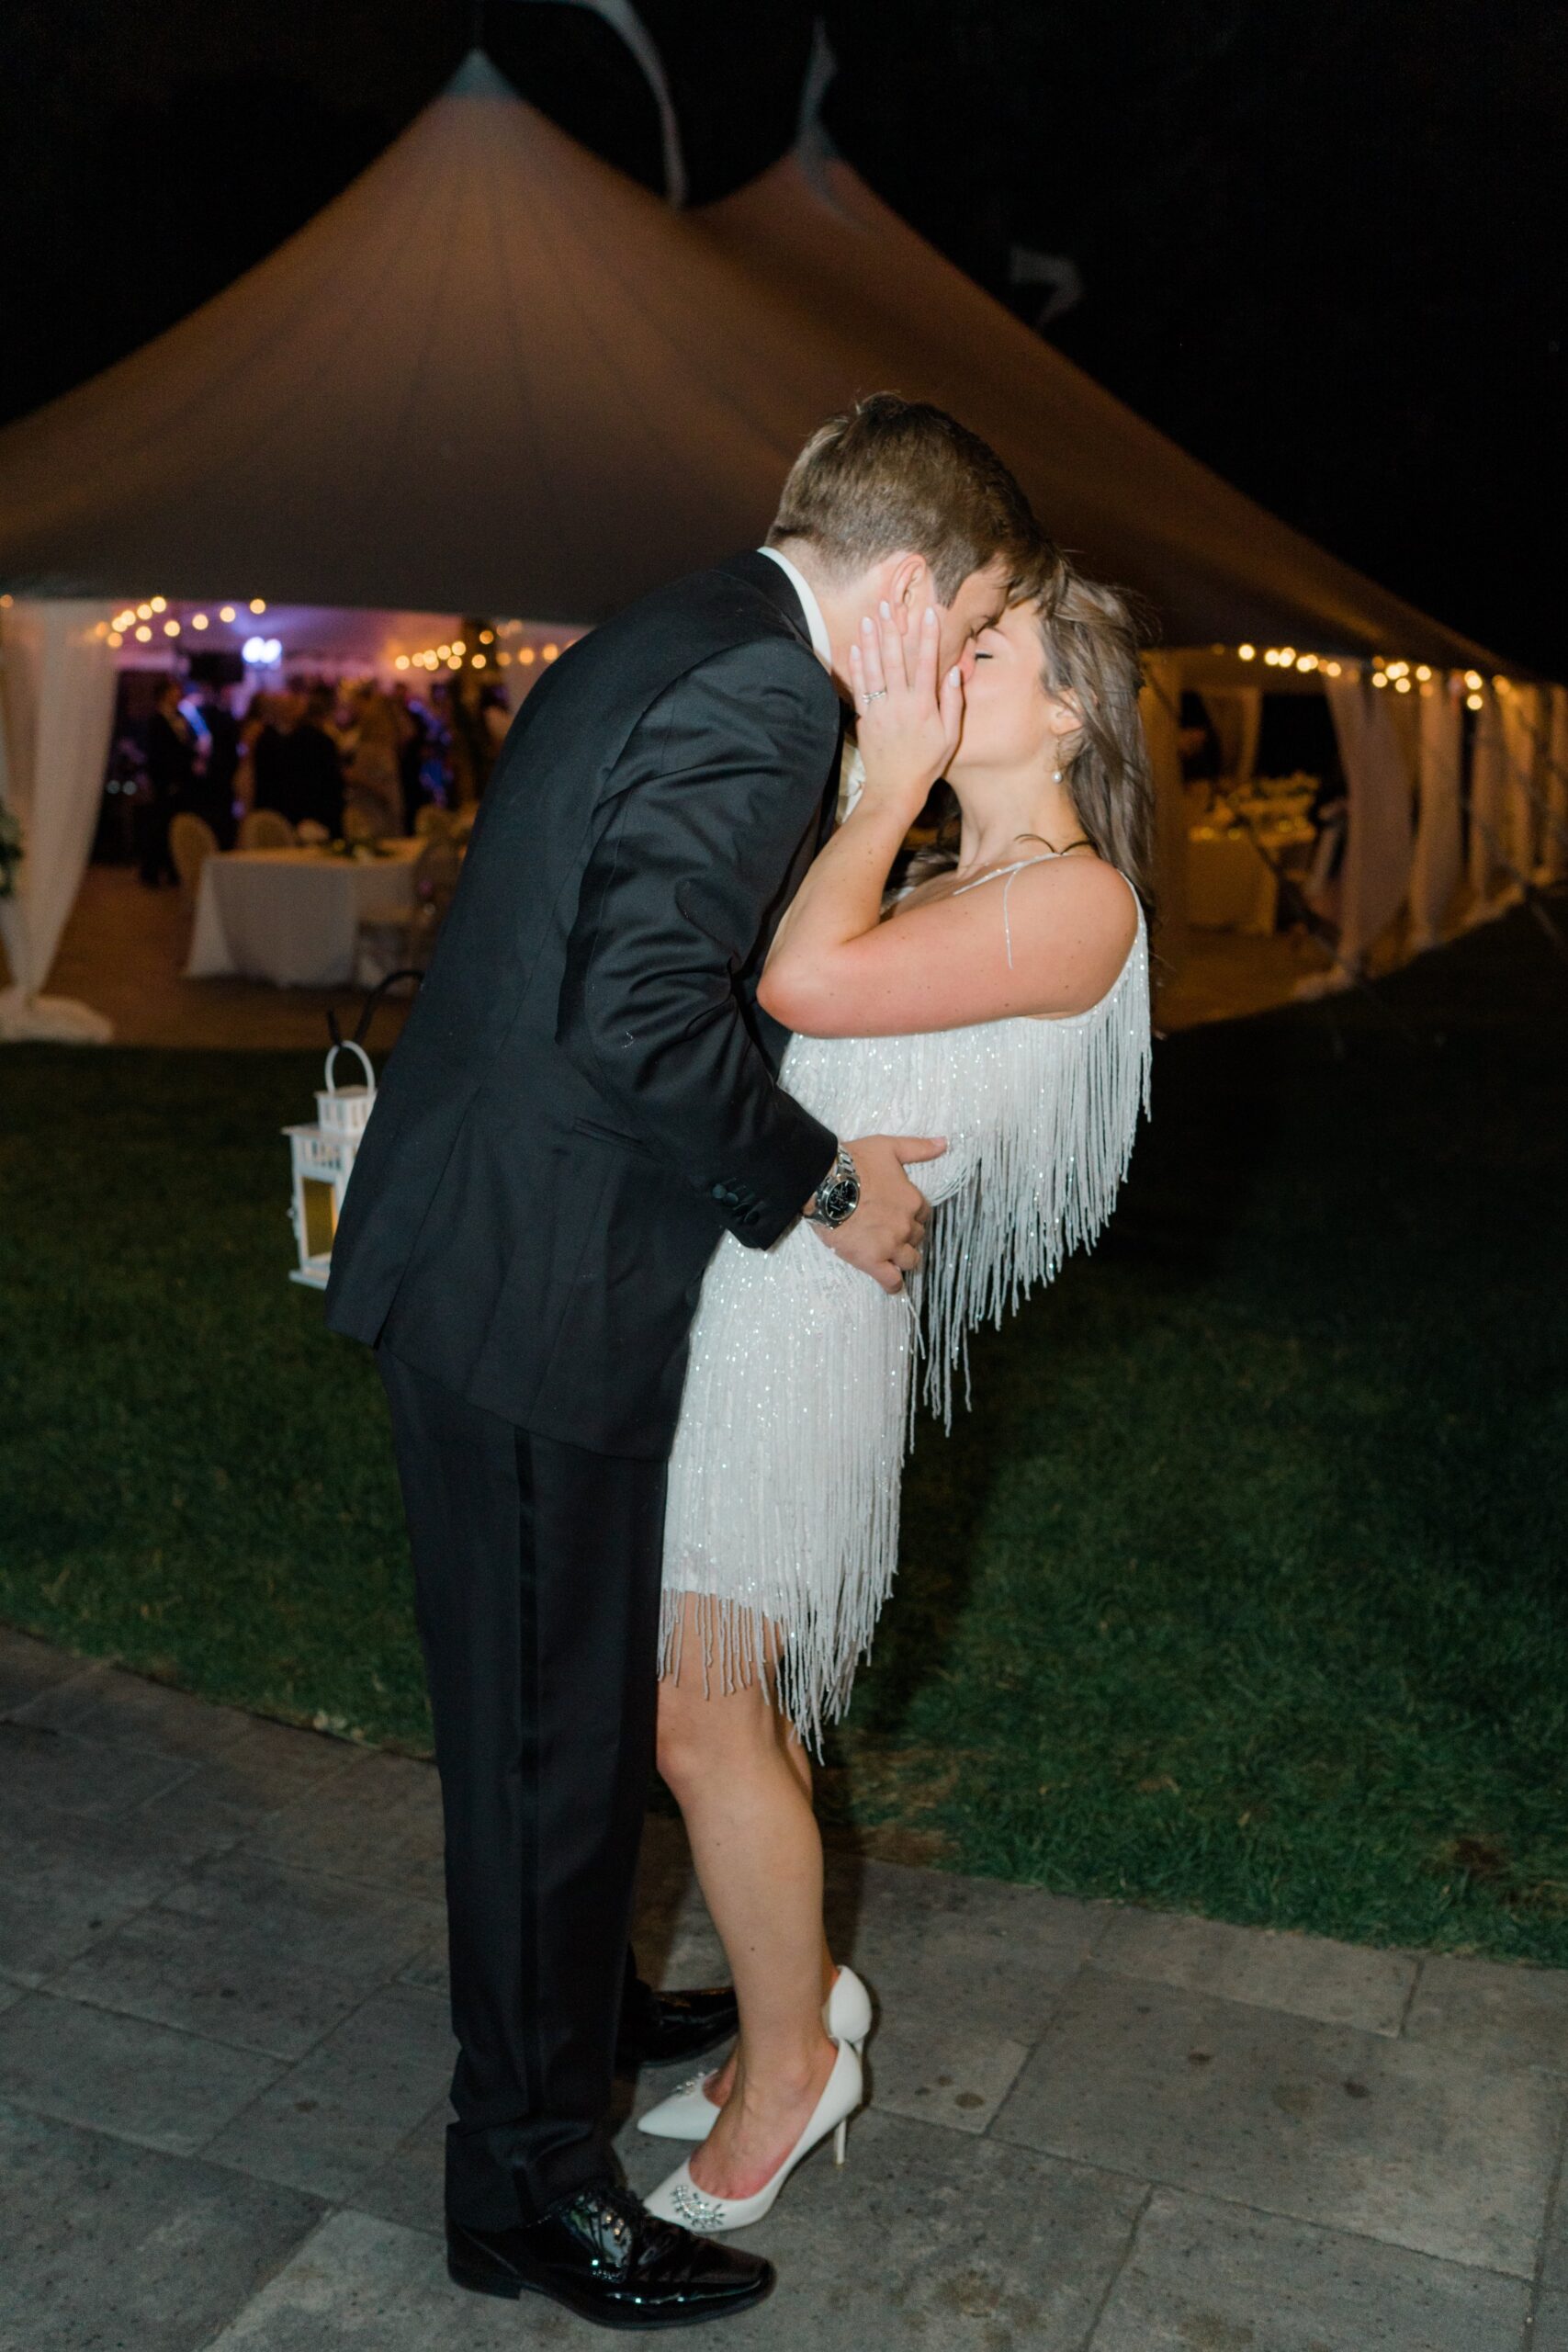 one last kiss after exiting wedding reception at Bradley Estate. Sperry tent.